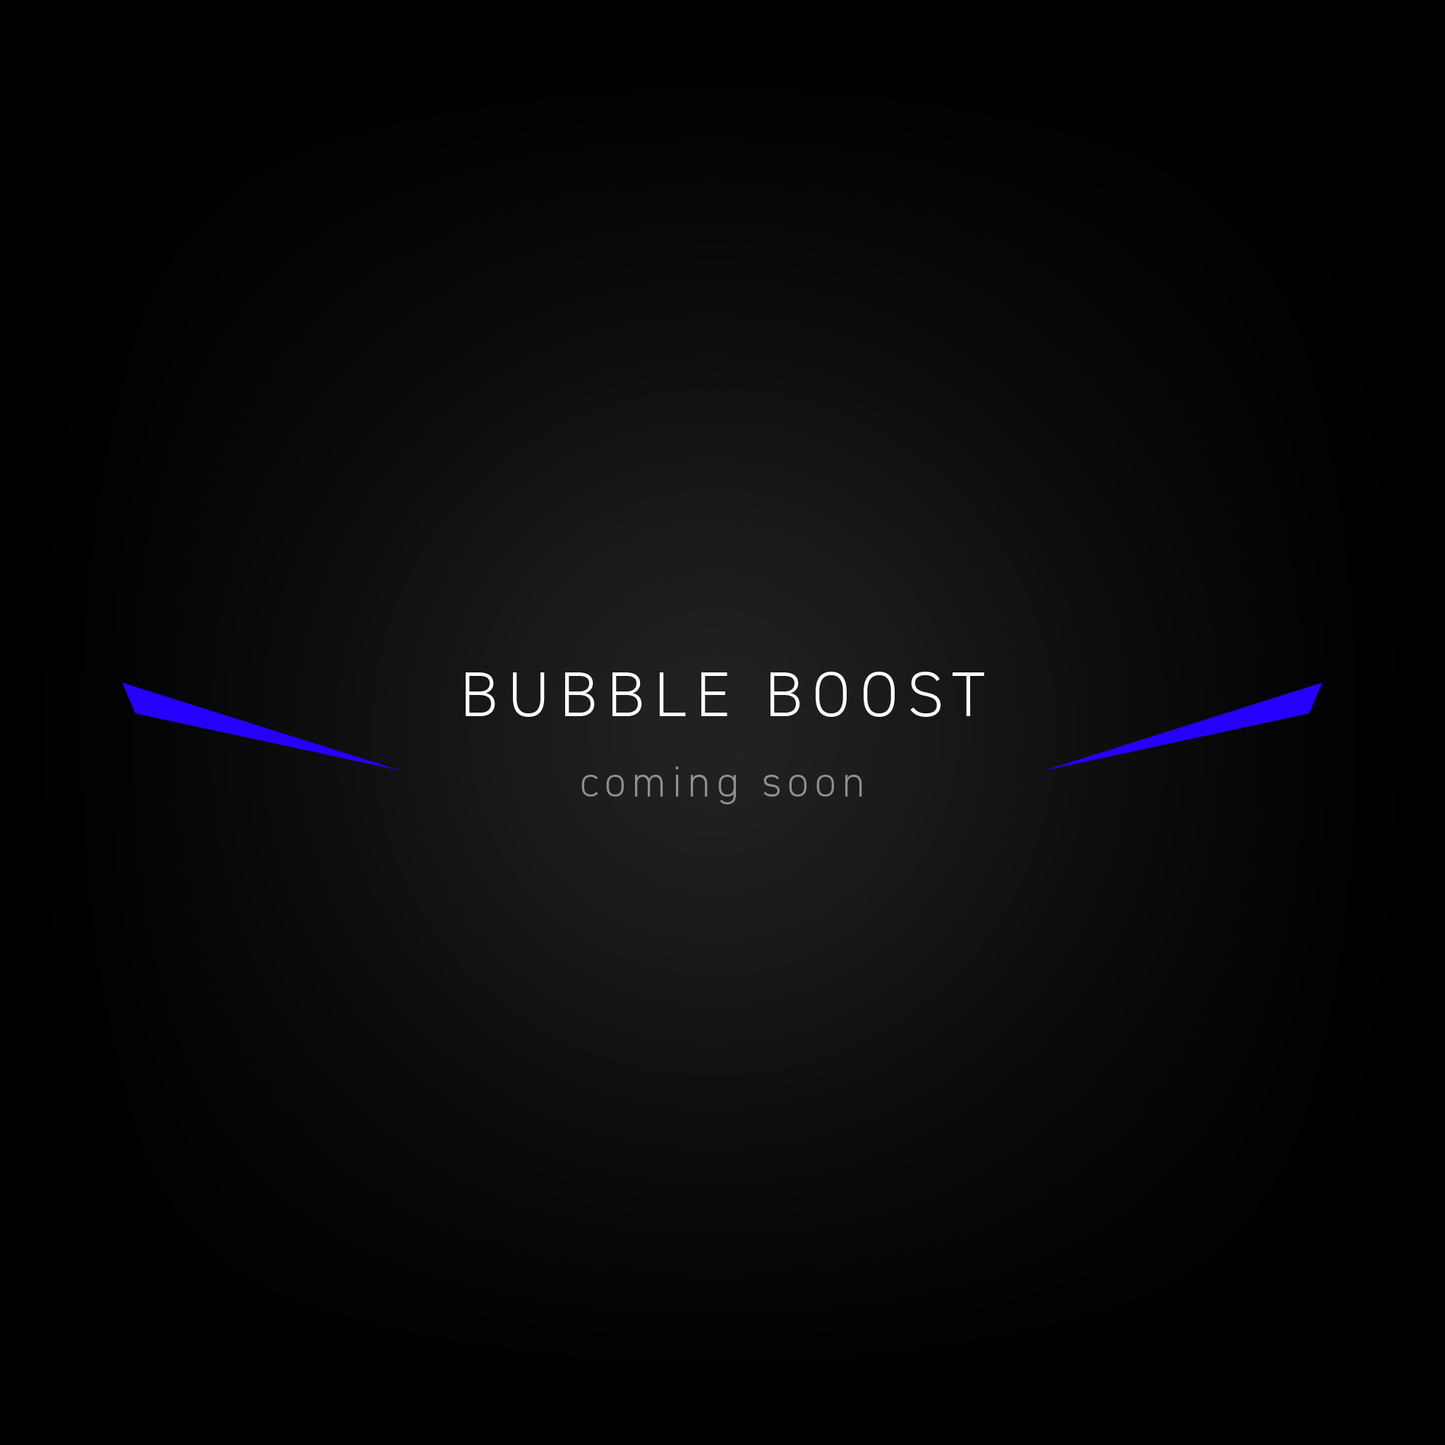 Coming soon: Bubble Boost